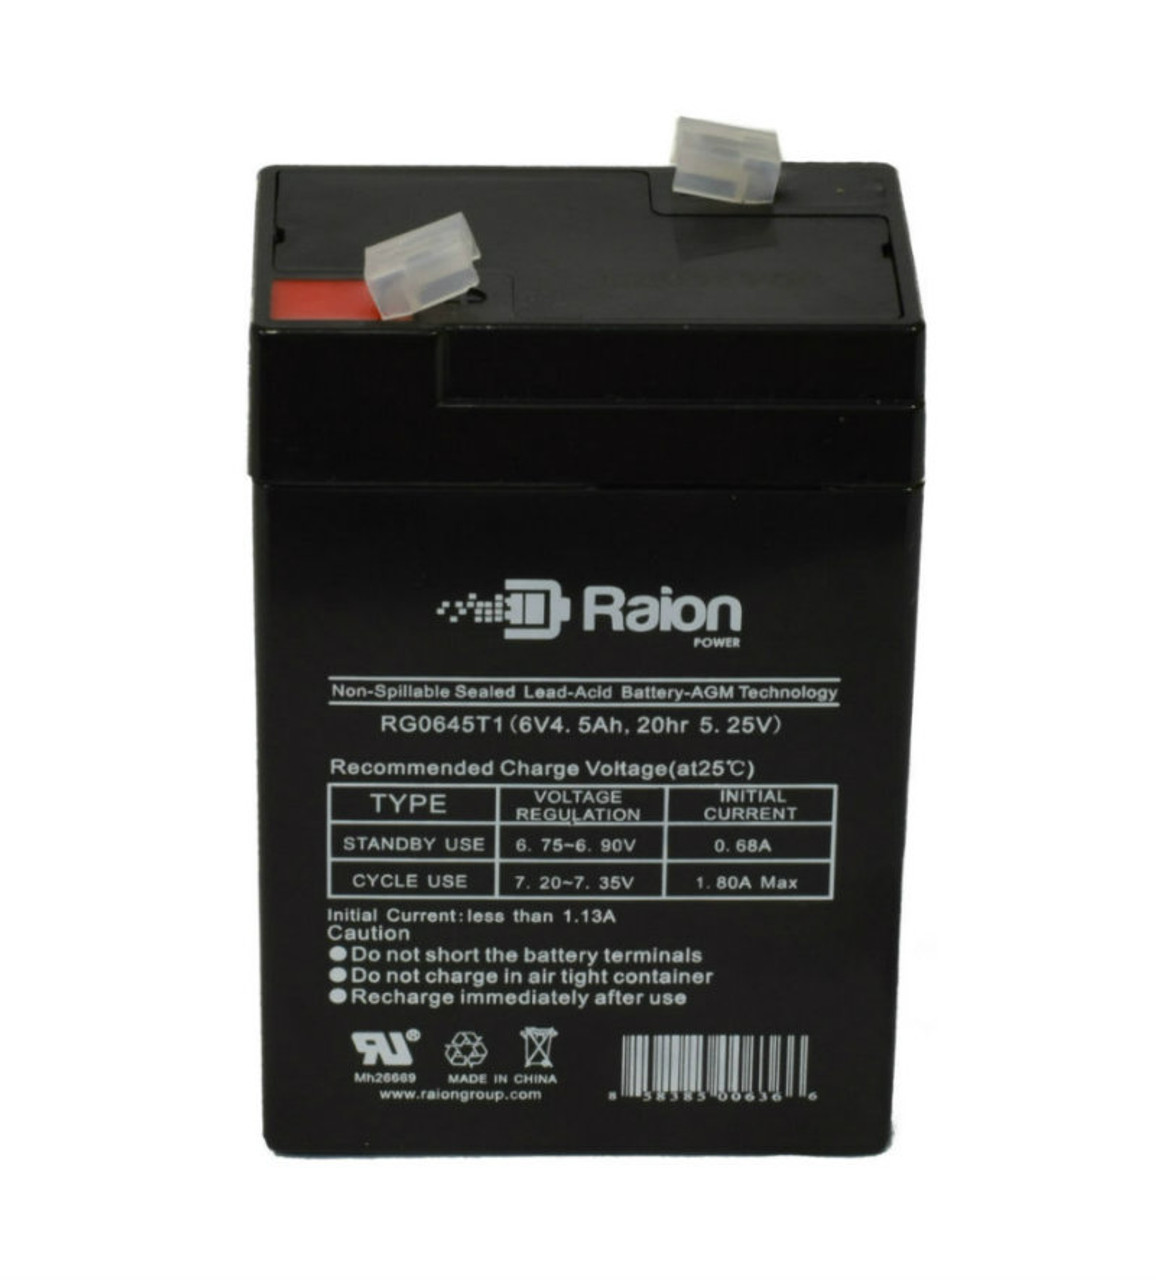 Raion Power RG0645T1 Replacement Battery Cartridge for Helios FB6-4.5